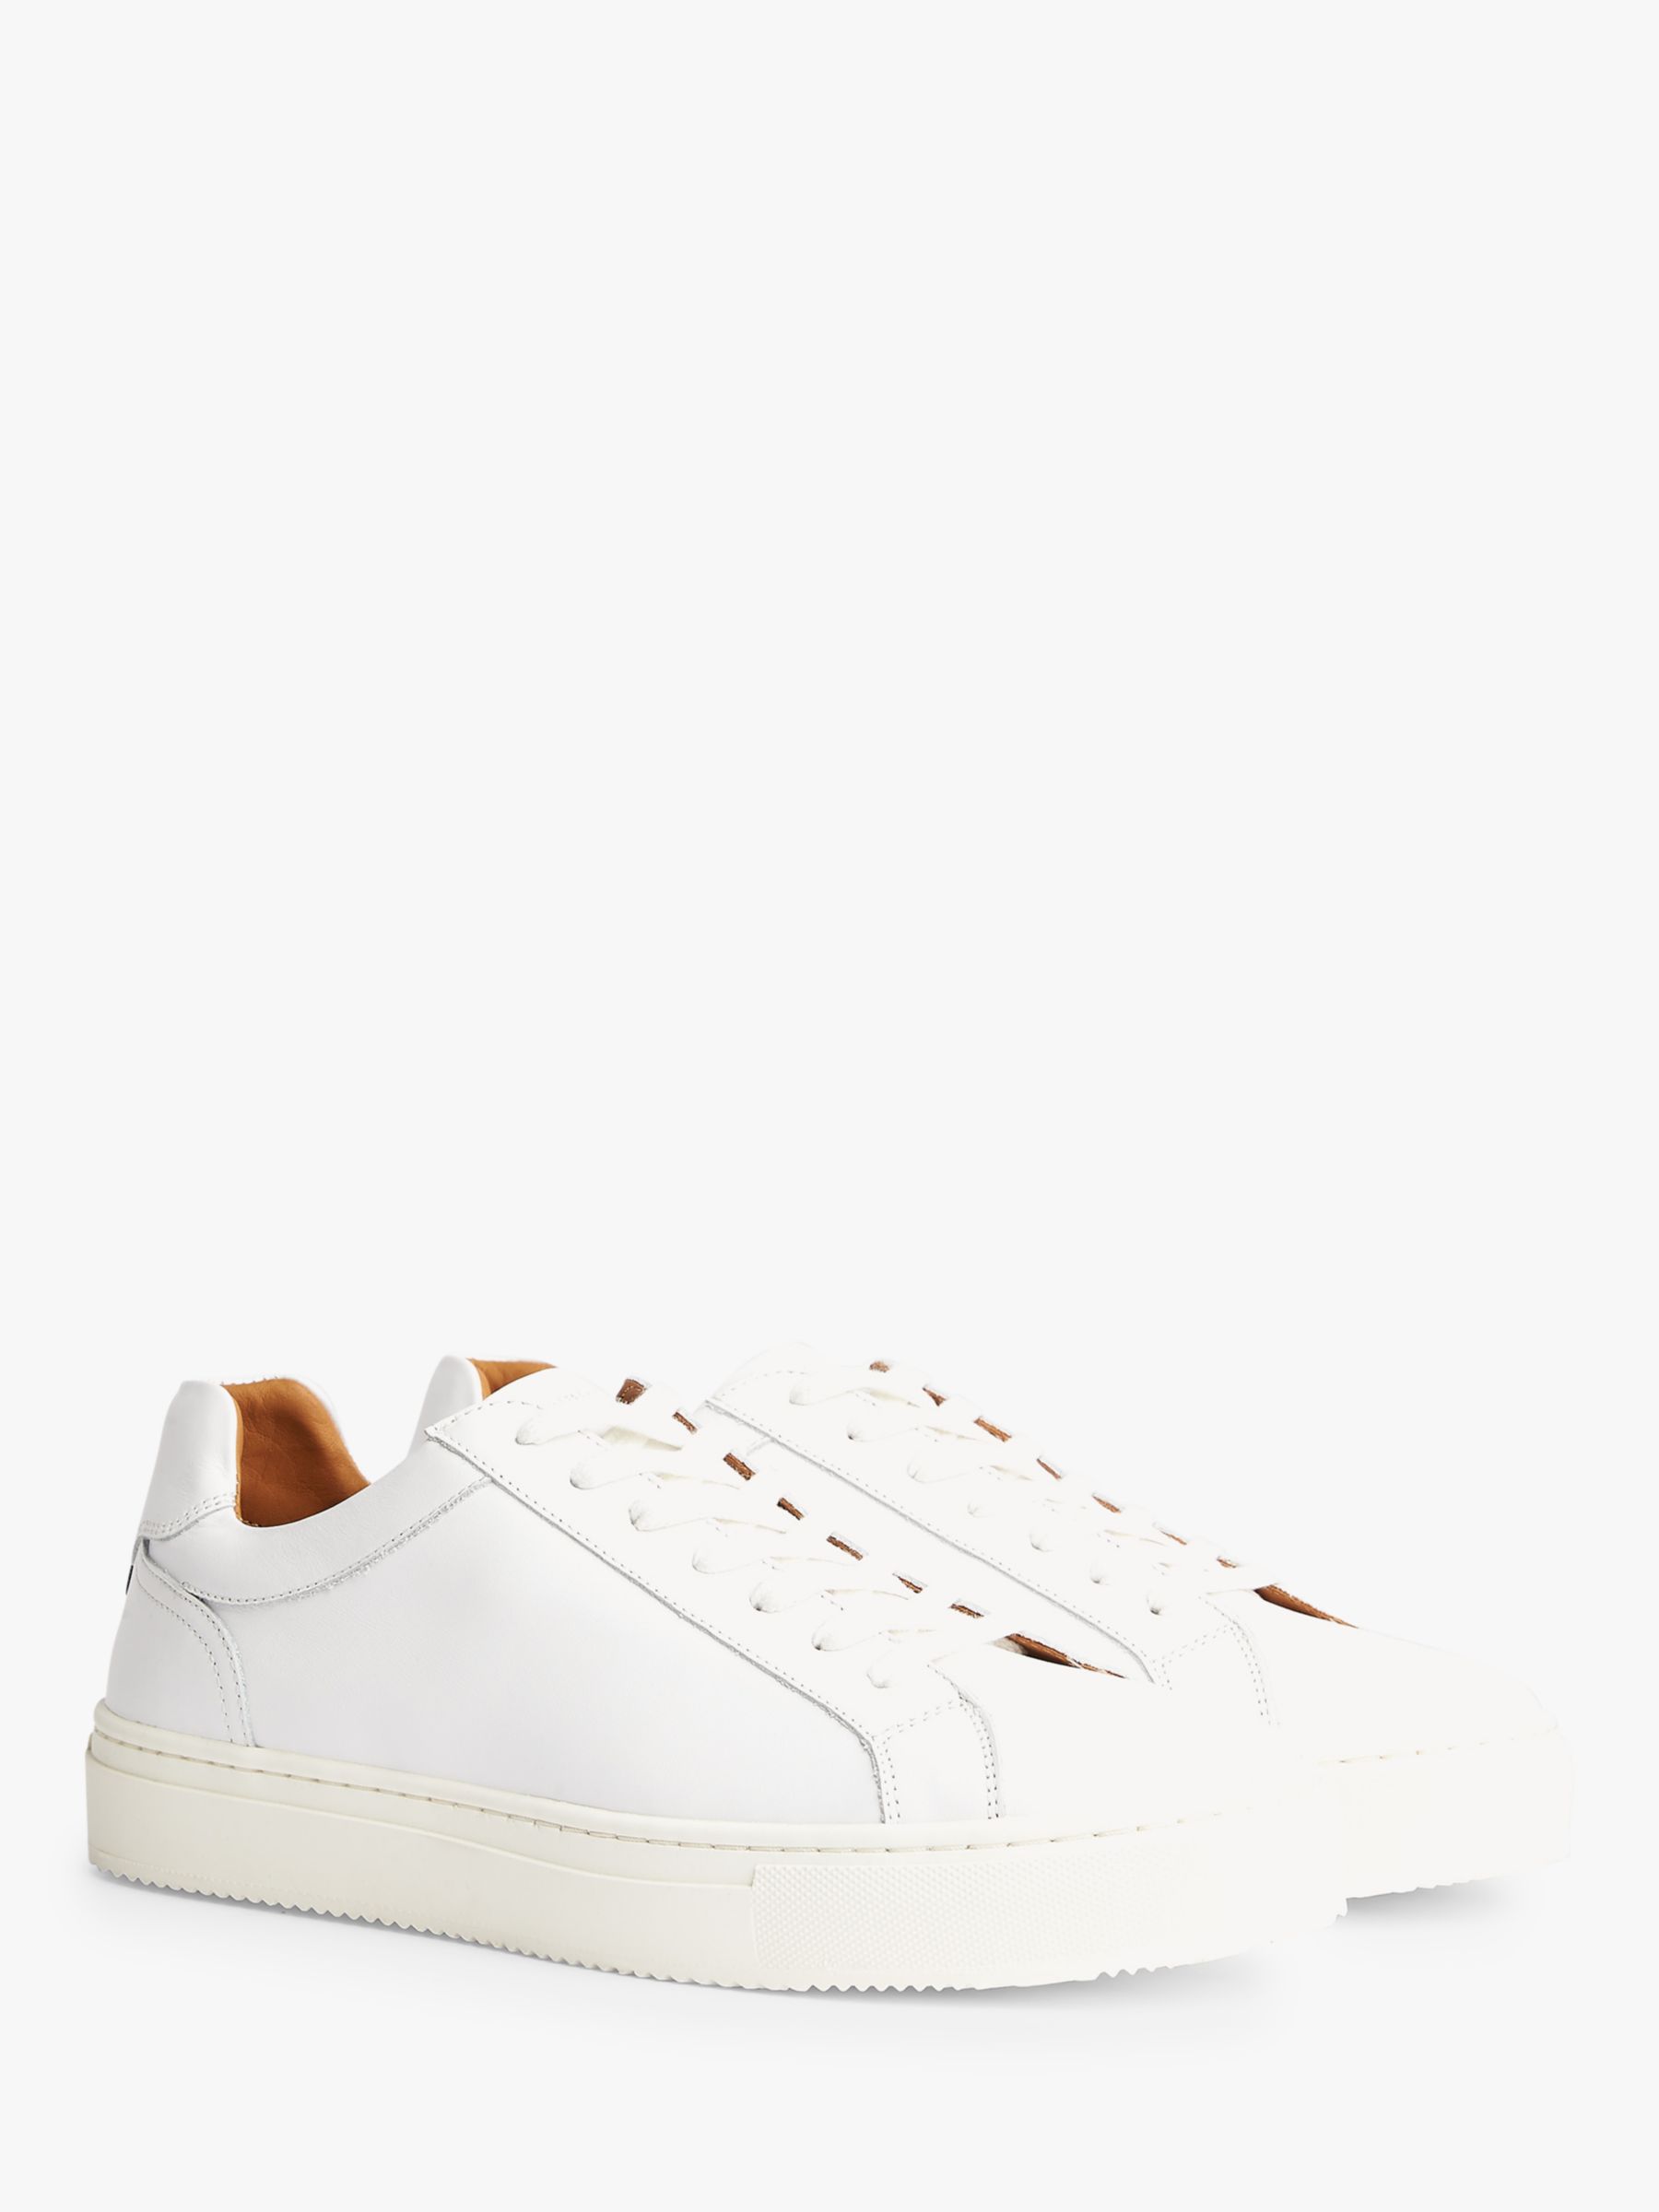 Tommy Hilfiger Premium Leather Cupsole Trainers, White at John Lewis ...